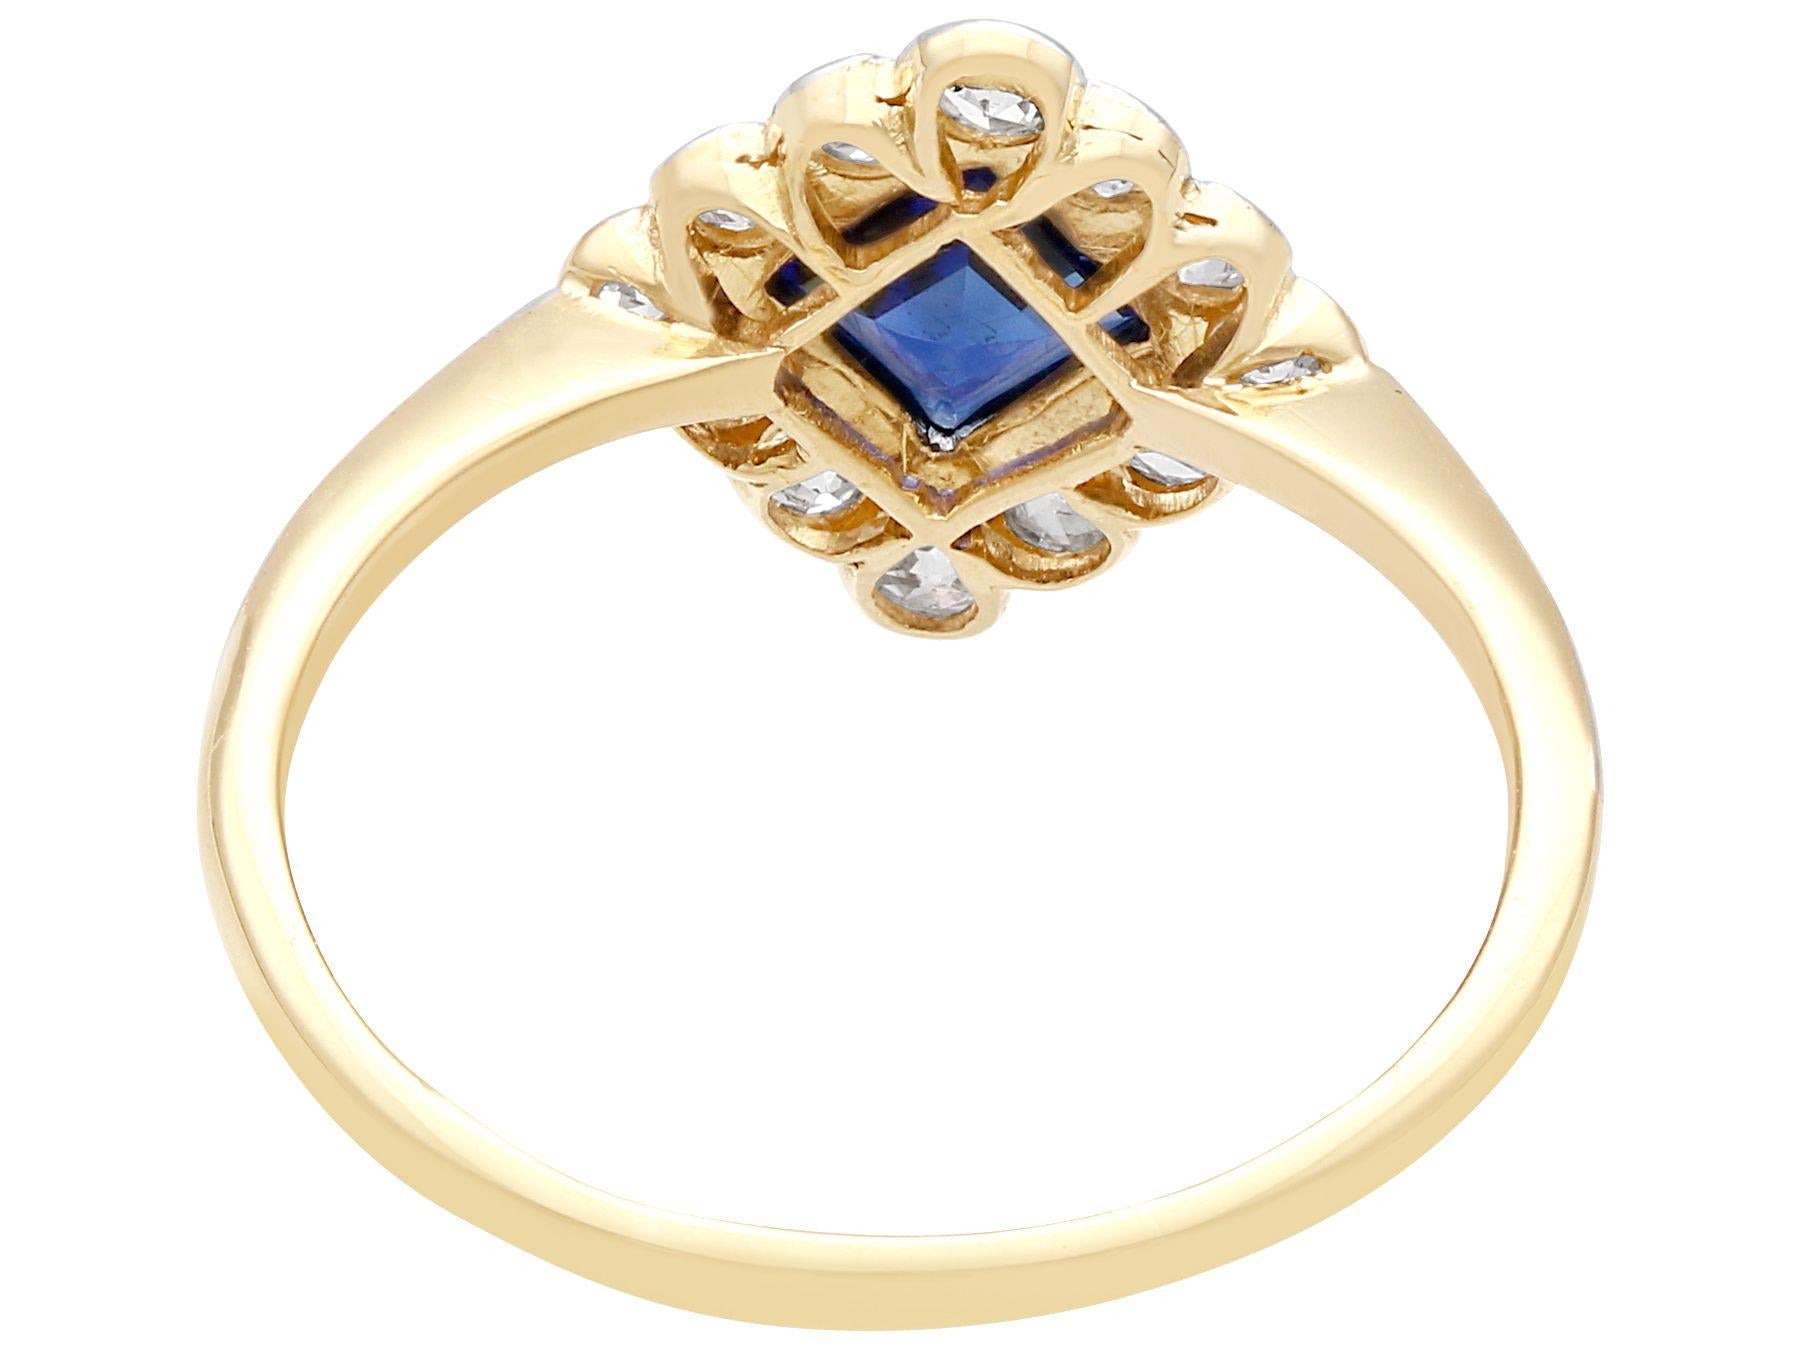 Antique Sapphire and Diamond Yellow Gold Cocktail Engagement Ring Circa 1925 In Excellent Condition For Sale In Jesmond, Newcastle Upon Tyne